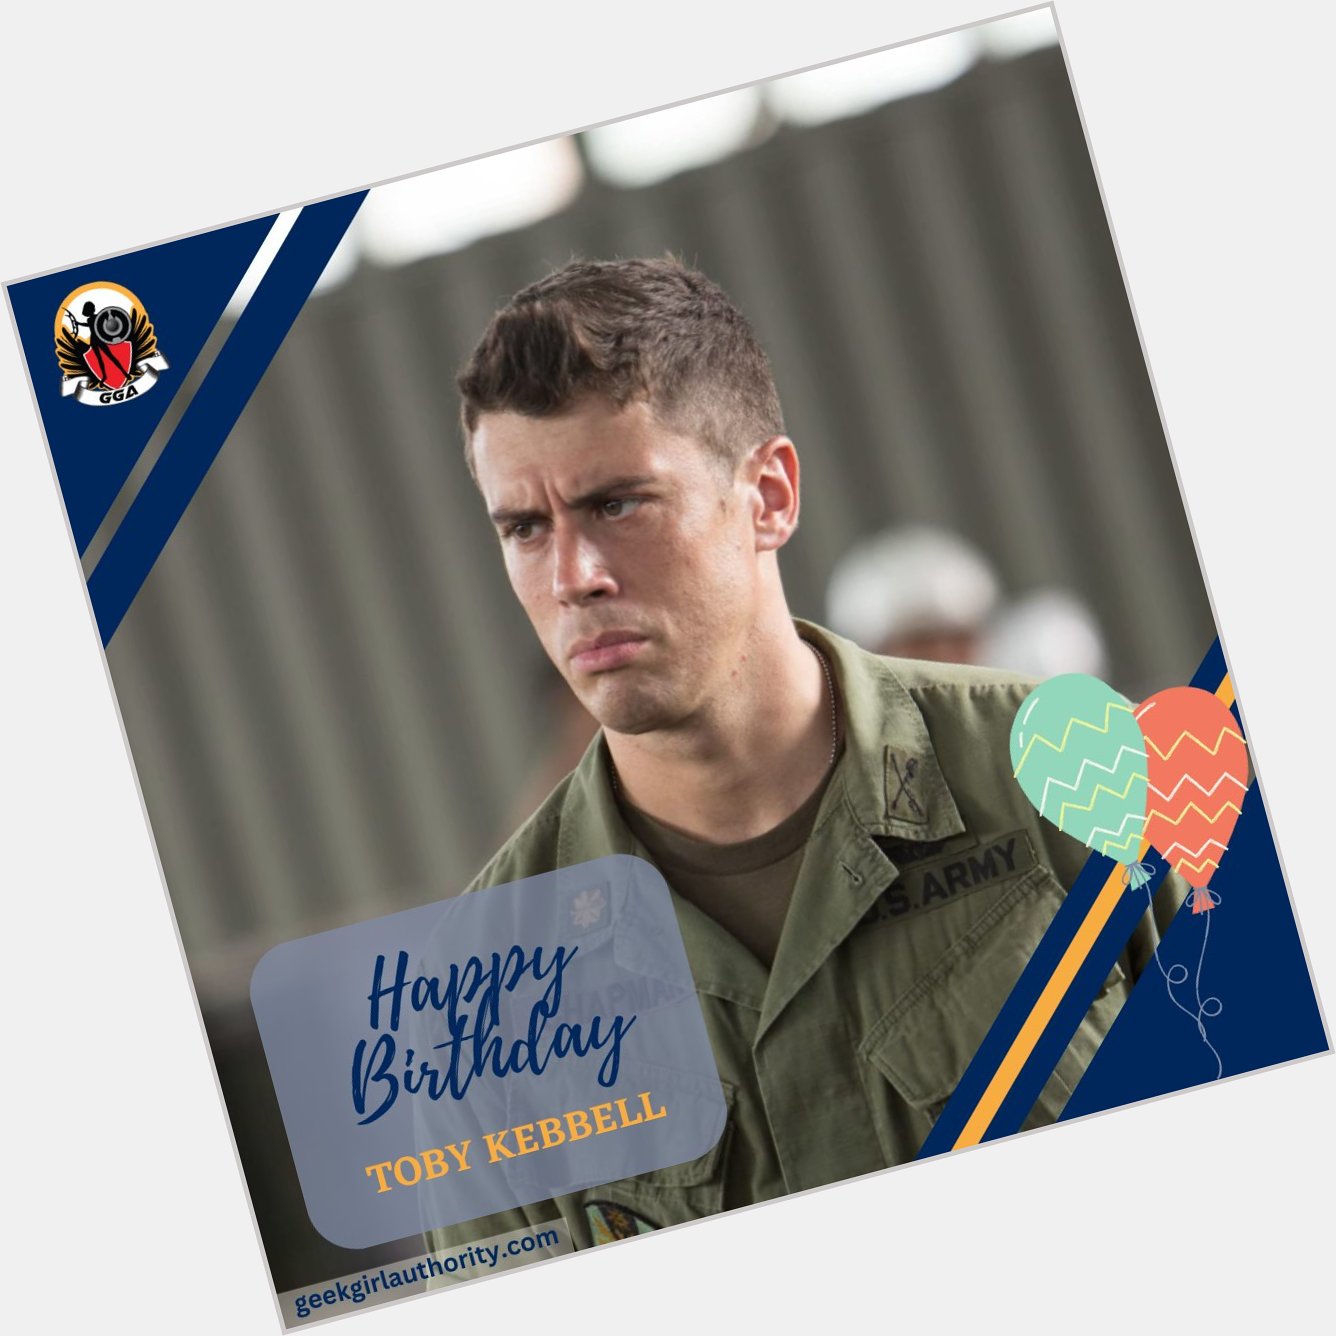 Happy Birthday, Toby Kebbell! Which one of his roles is your favorite? 